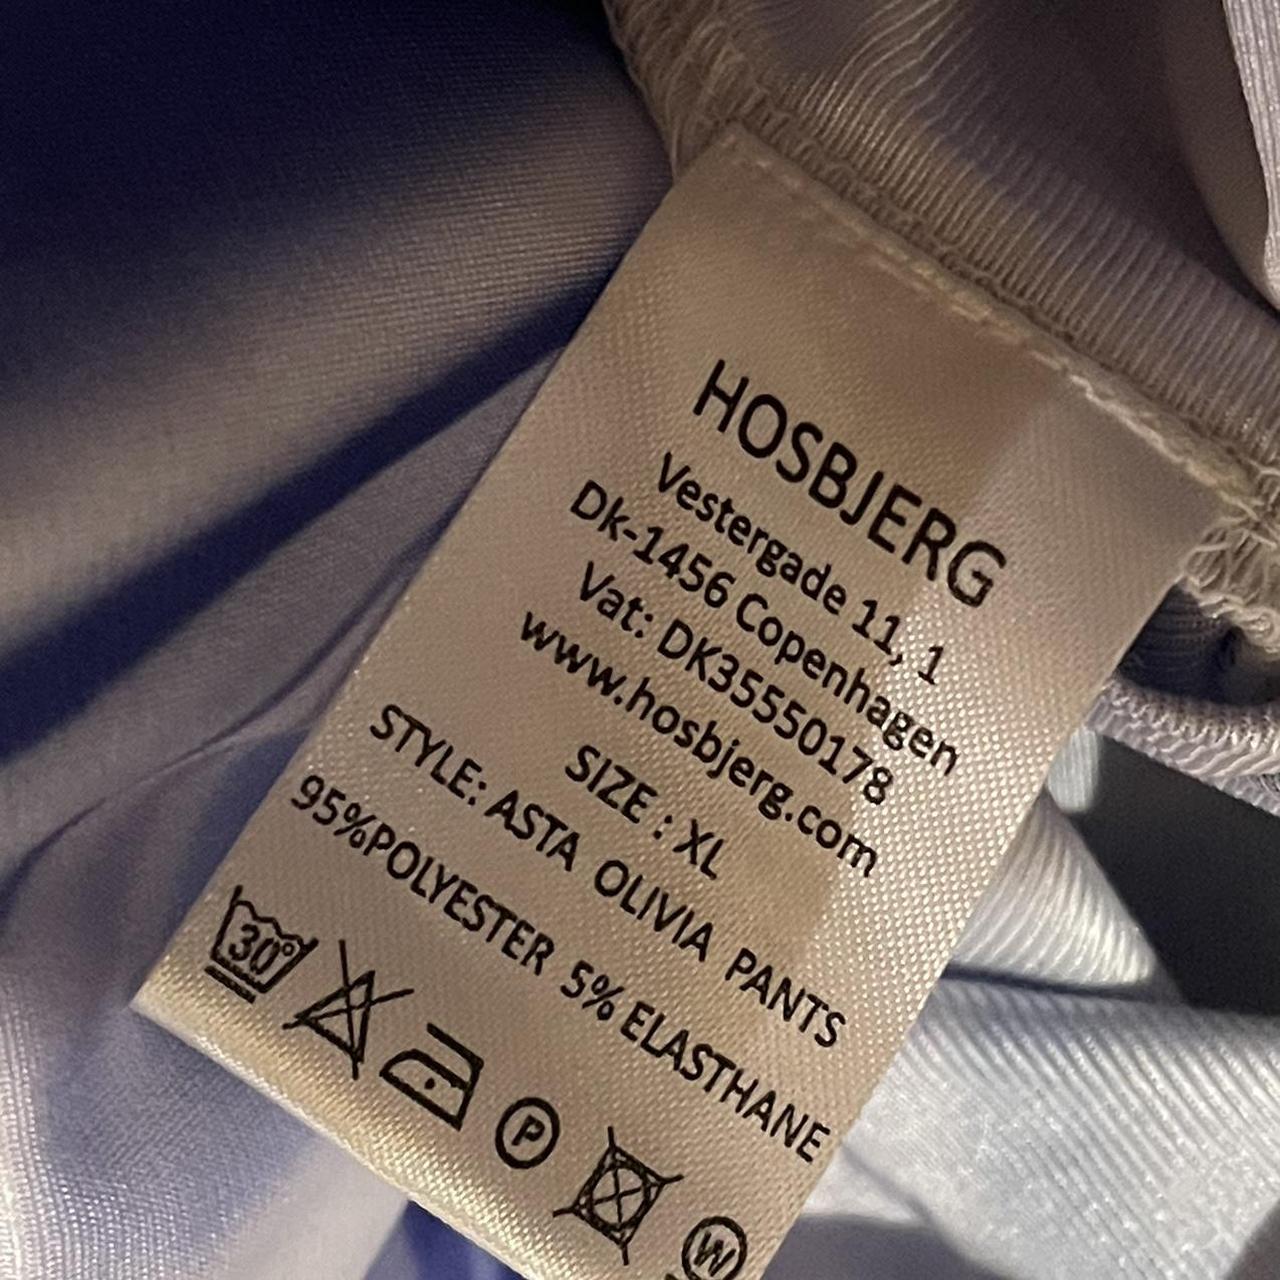 Hosbjerg Women's Blue and White Trousers (6)